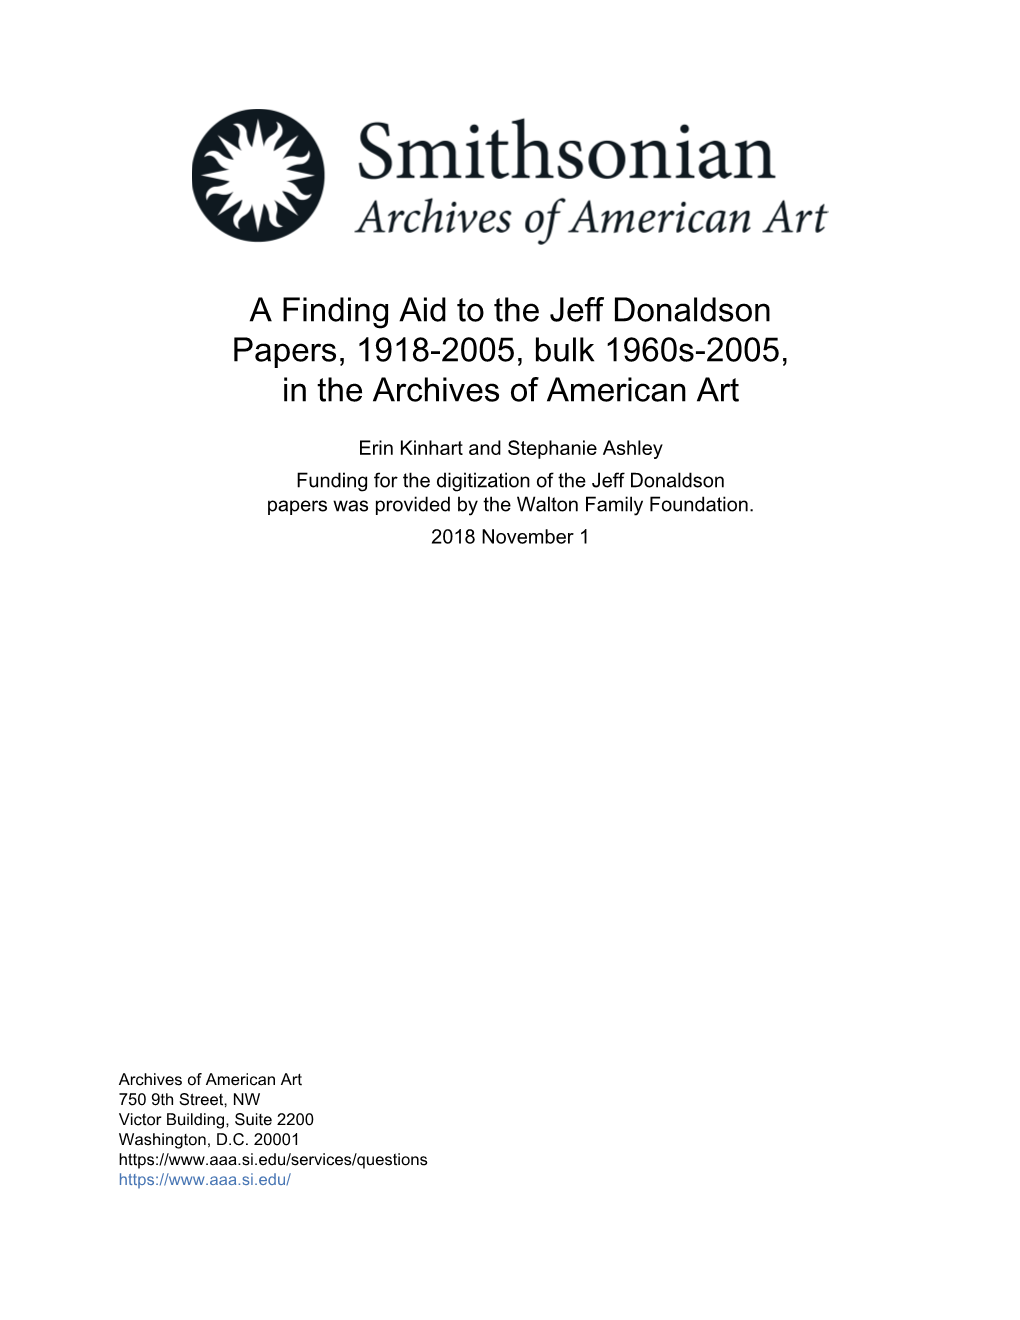 A Finding Aid to the Jeff Donaldson Papers, 1918-2005, Bulk 1960S-2005, in the Archives of American Art